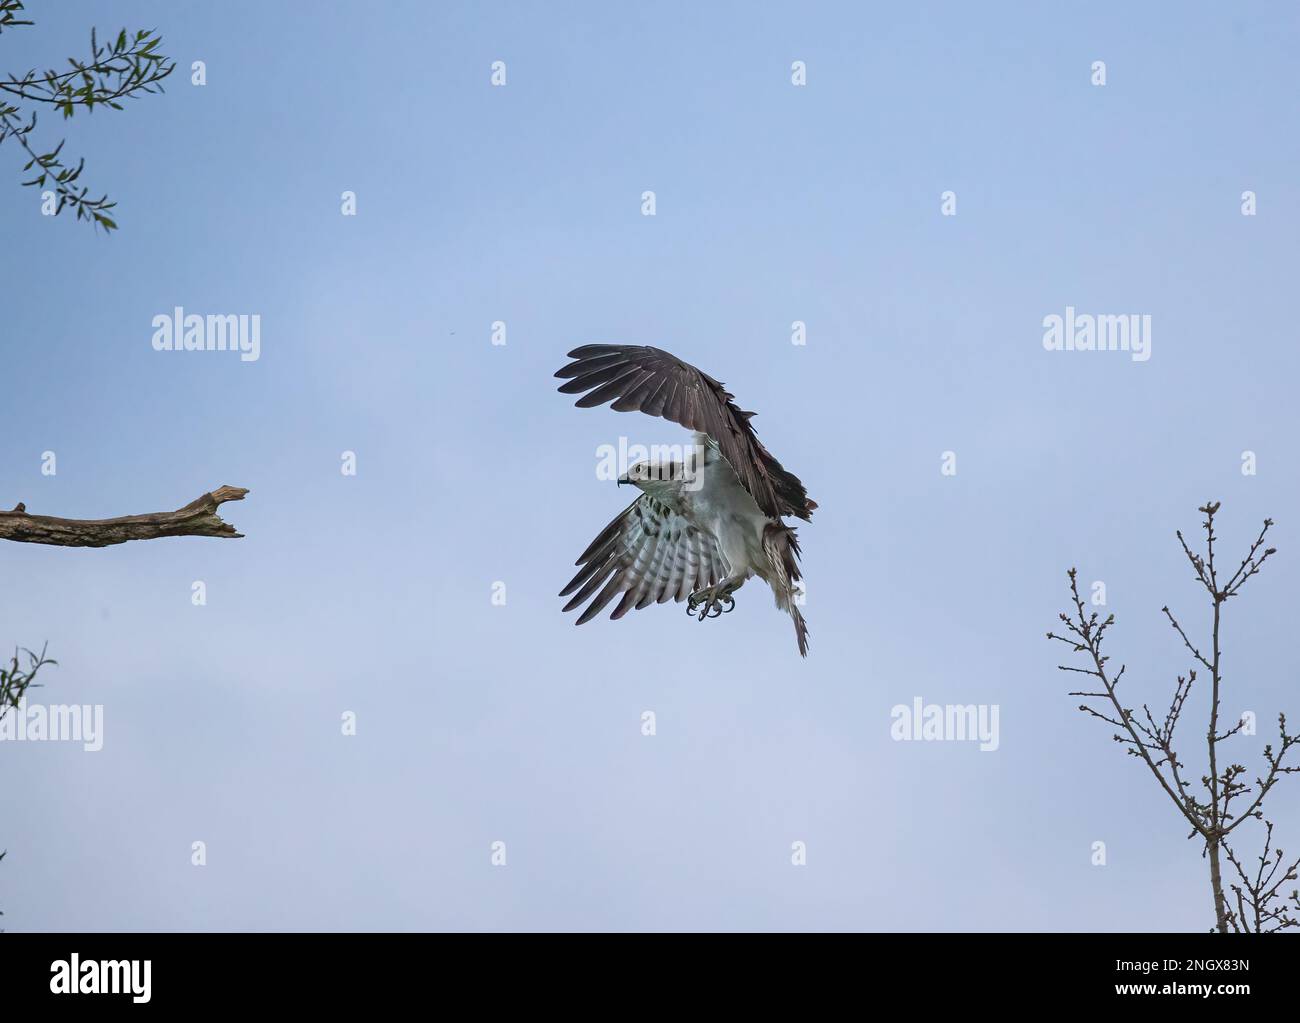 An action  shot of an Osprey (Pandion haliaetus) coming in to land on a dead branch  , huge wings outstretched showing feather detail . Rutland, UK Stock Photo